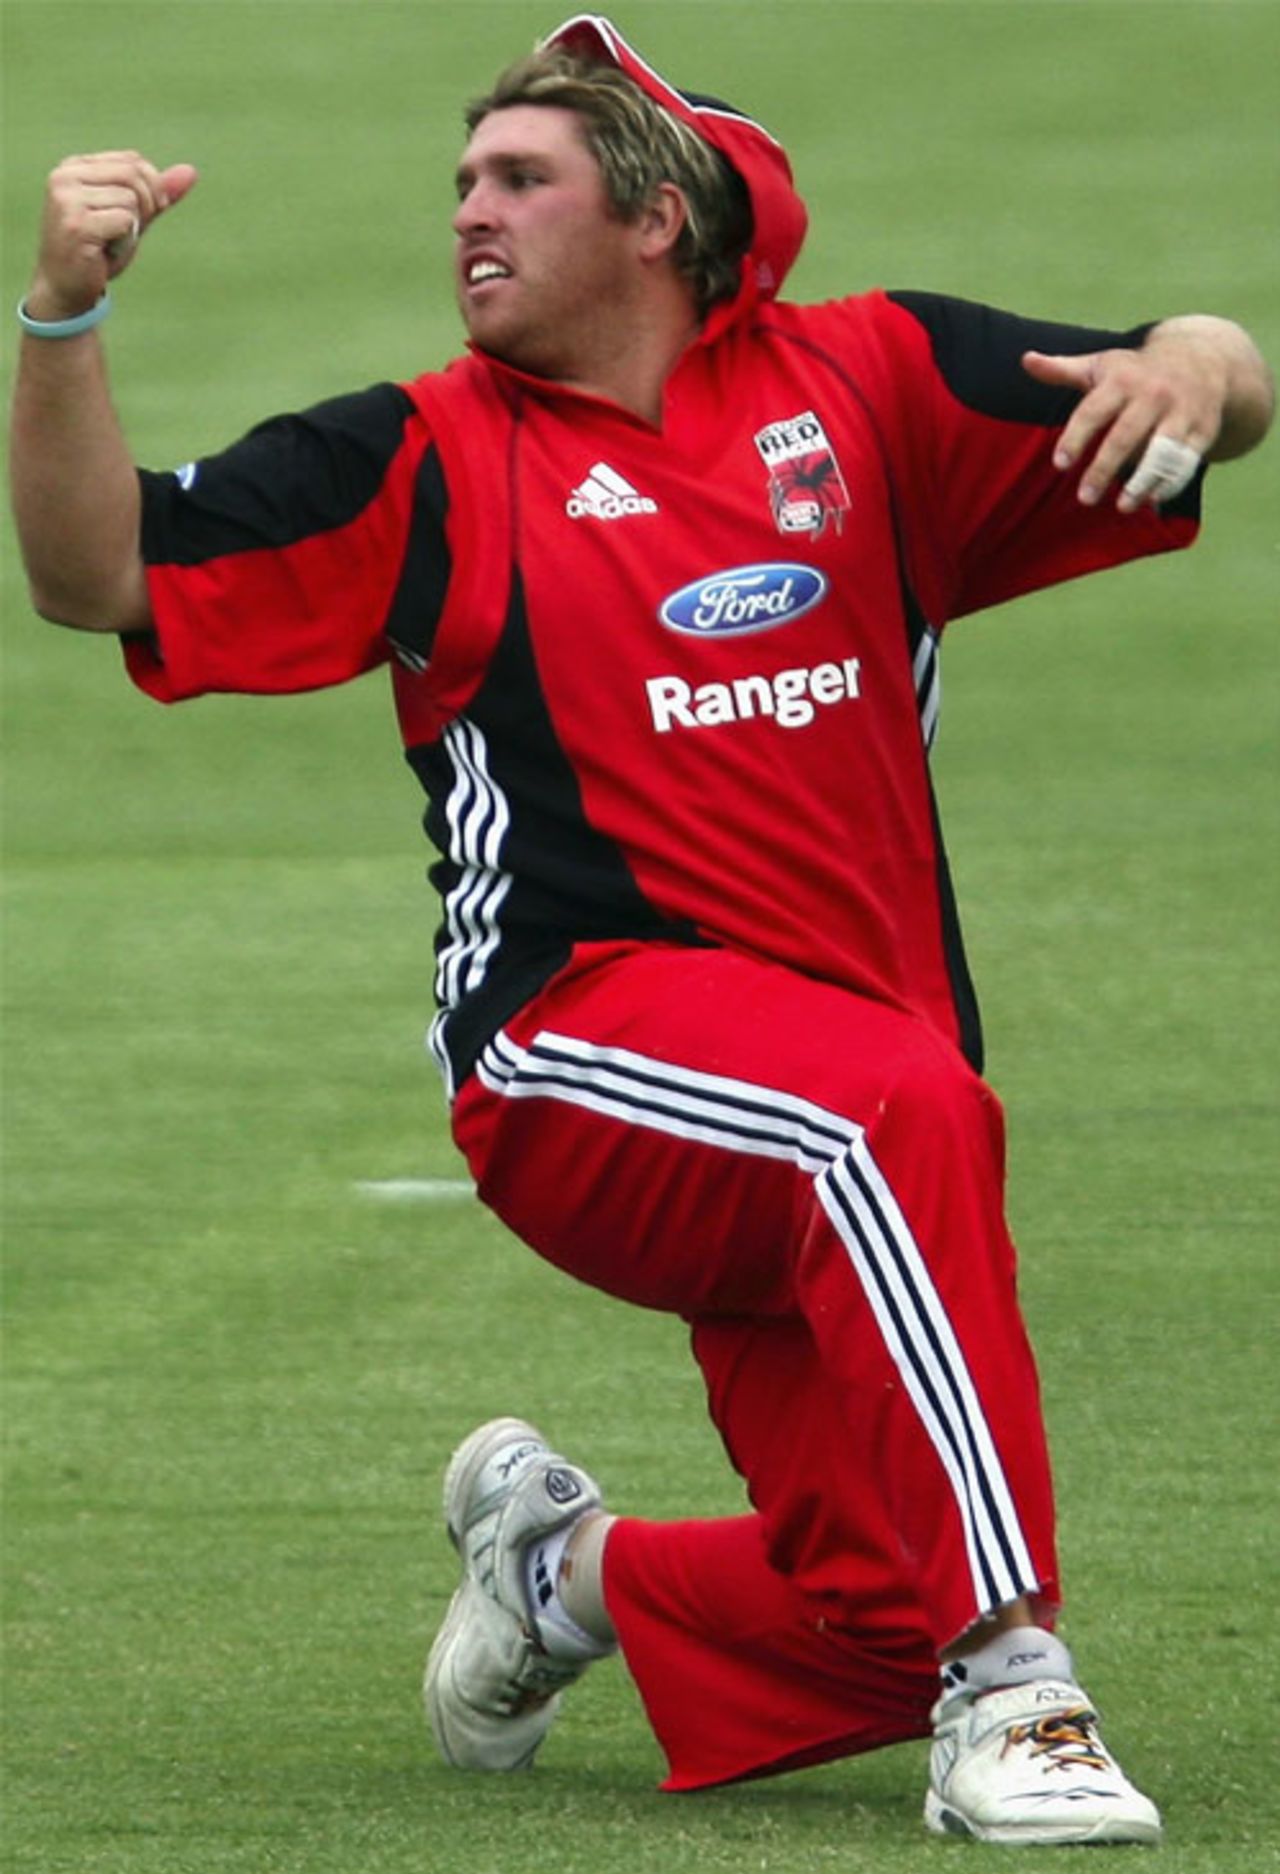 Mark Cosgrove lent a weighty contribution to South Australia's fielding, South Australia v Queensland, FR Cup, Adelaide, December 23, 2007